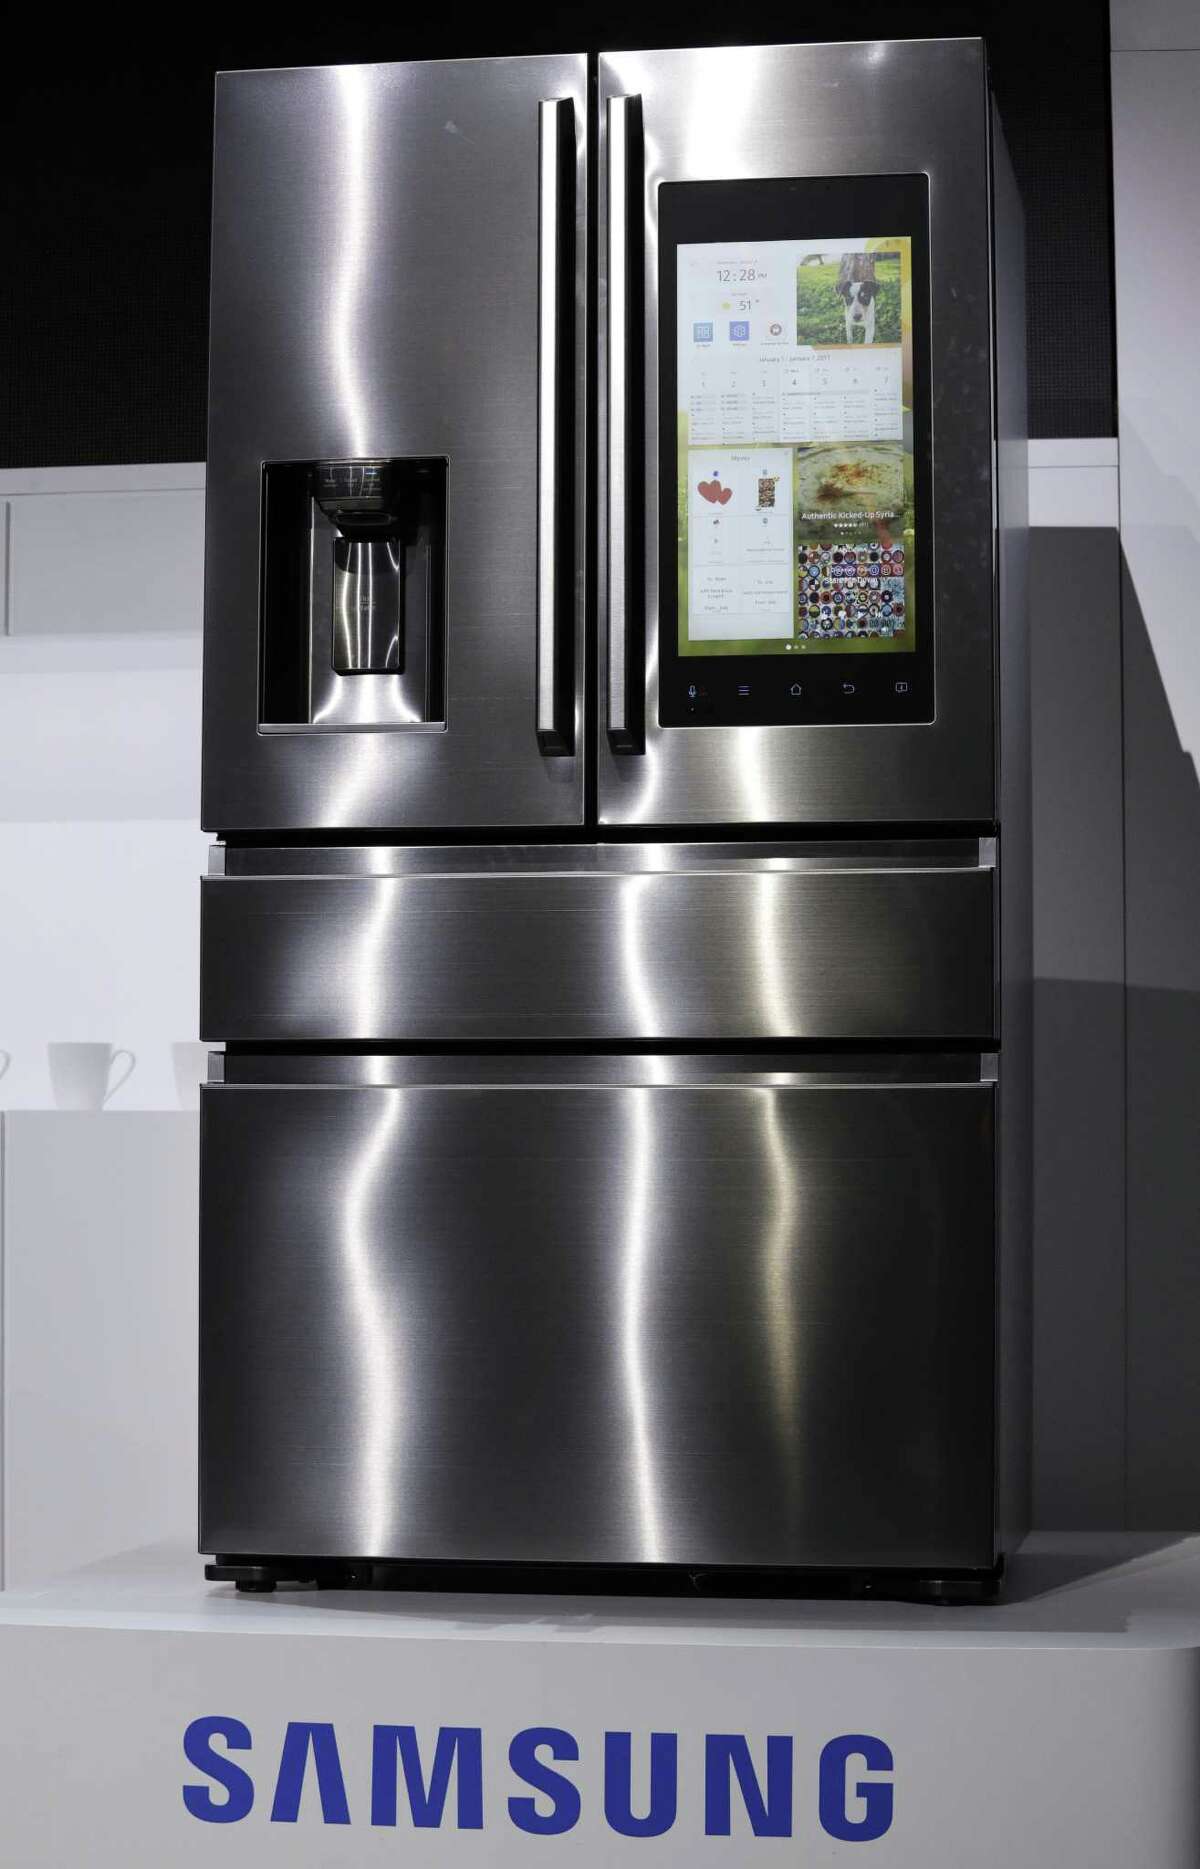 A refrigerator with Family Hub 2.0 is on display during a Samsung news conference before the CES tech show in Las Vegas. Family Hub 2.0 features an interface on the refrigerator with apps that can be controlled by voice recognition.